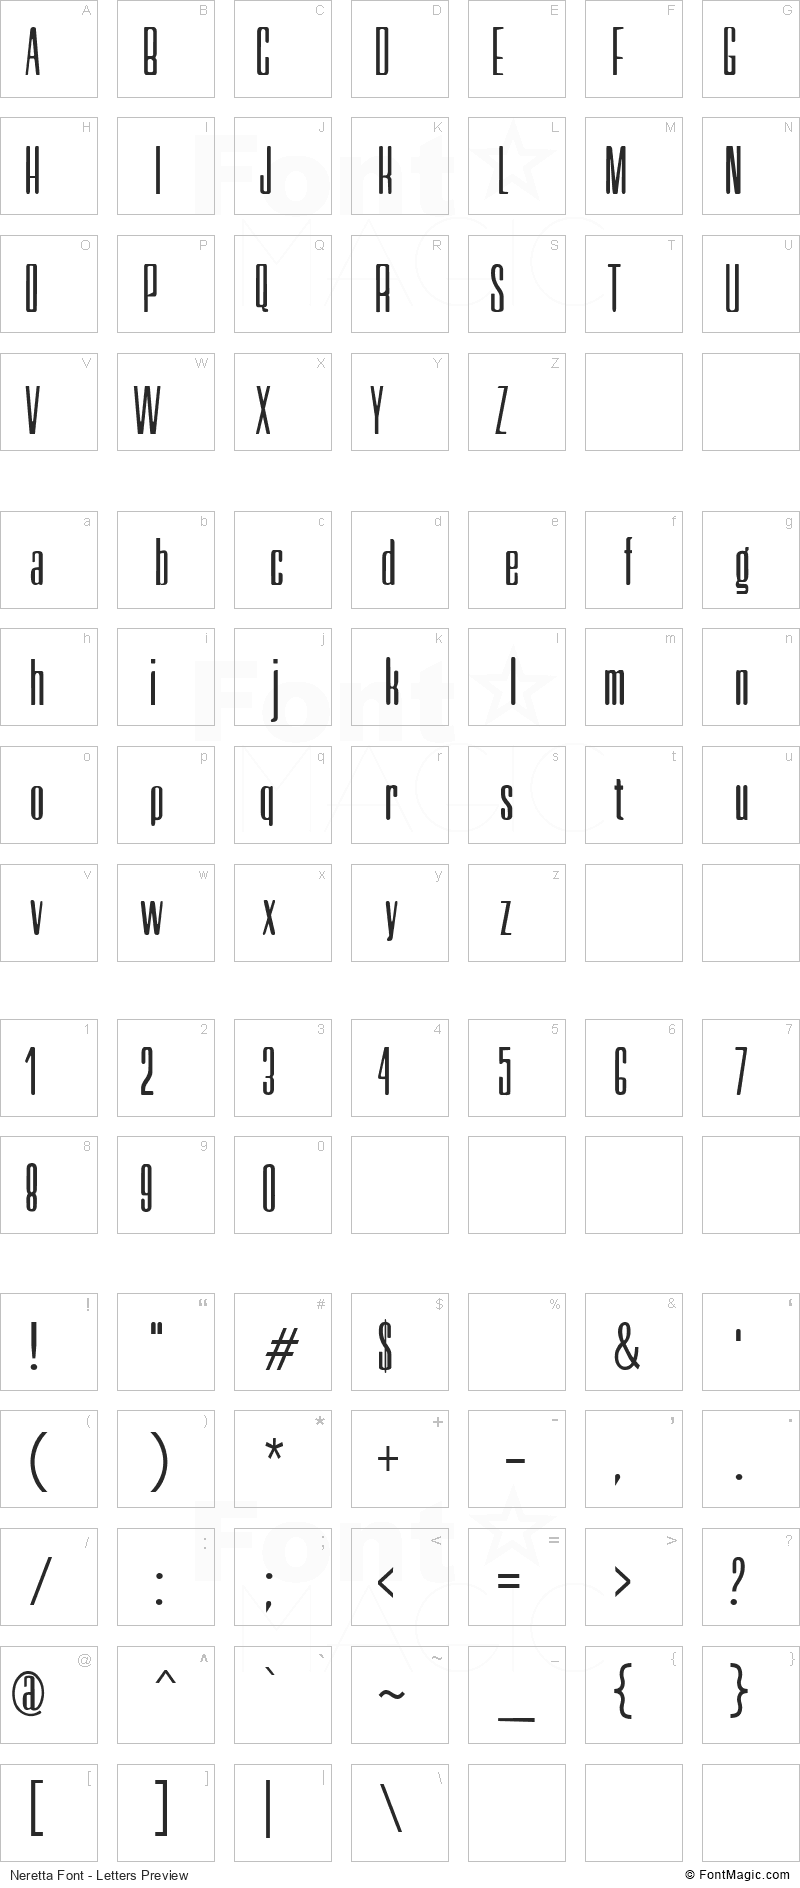 Neretta Font - All Latters Preview Chart